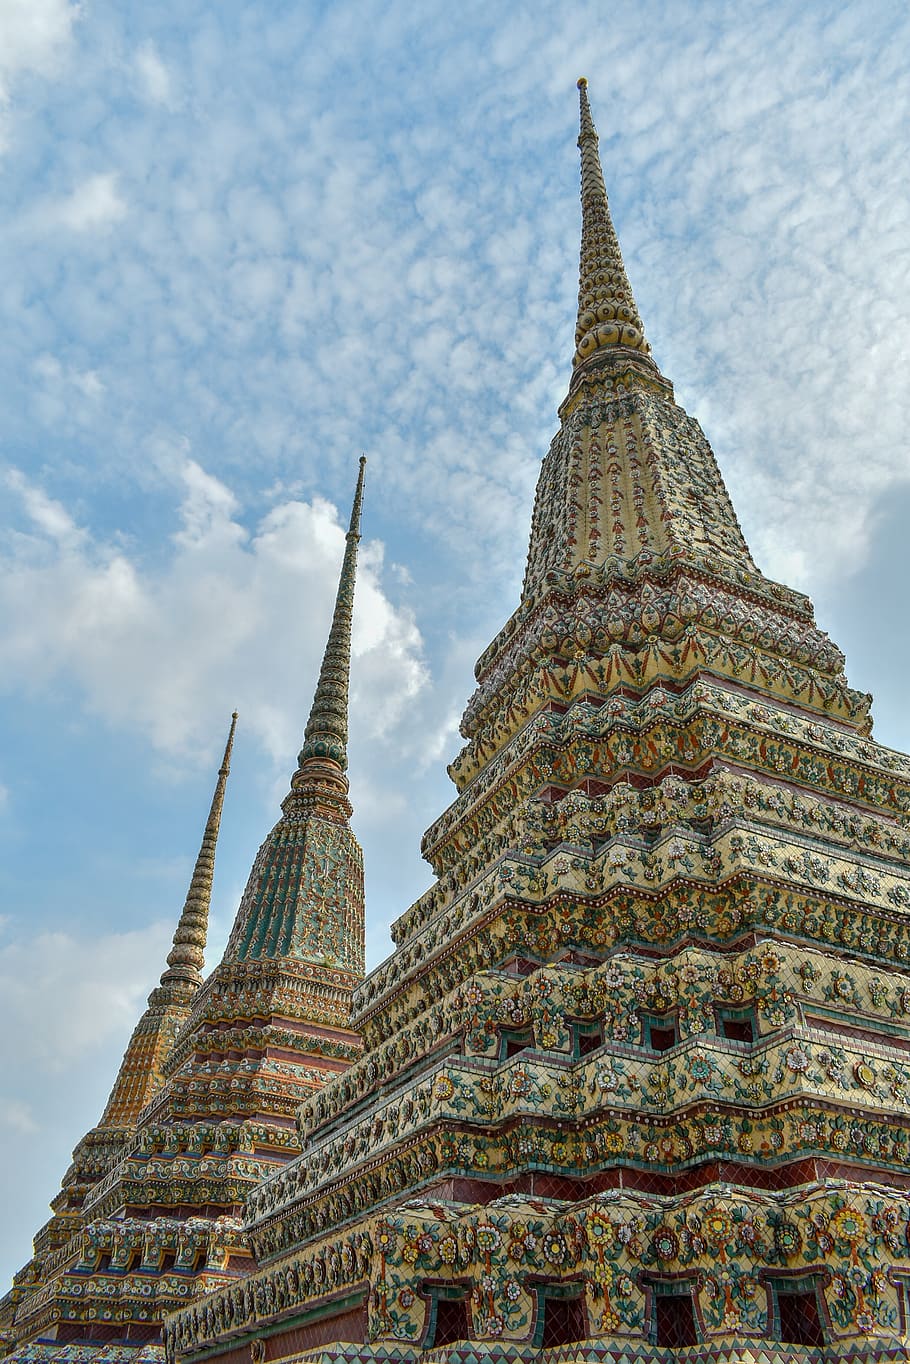 wat pho temple, thailand, temple, buddha, meditation, religious, asia, architecture, old, golden